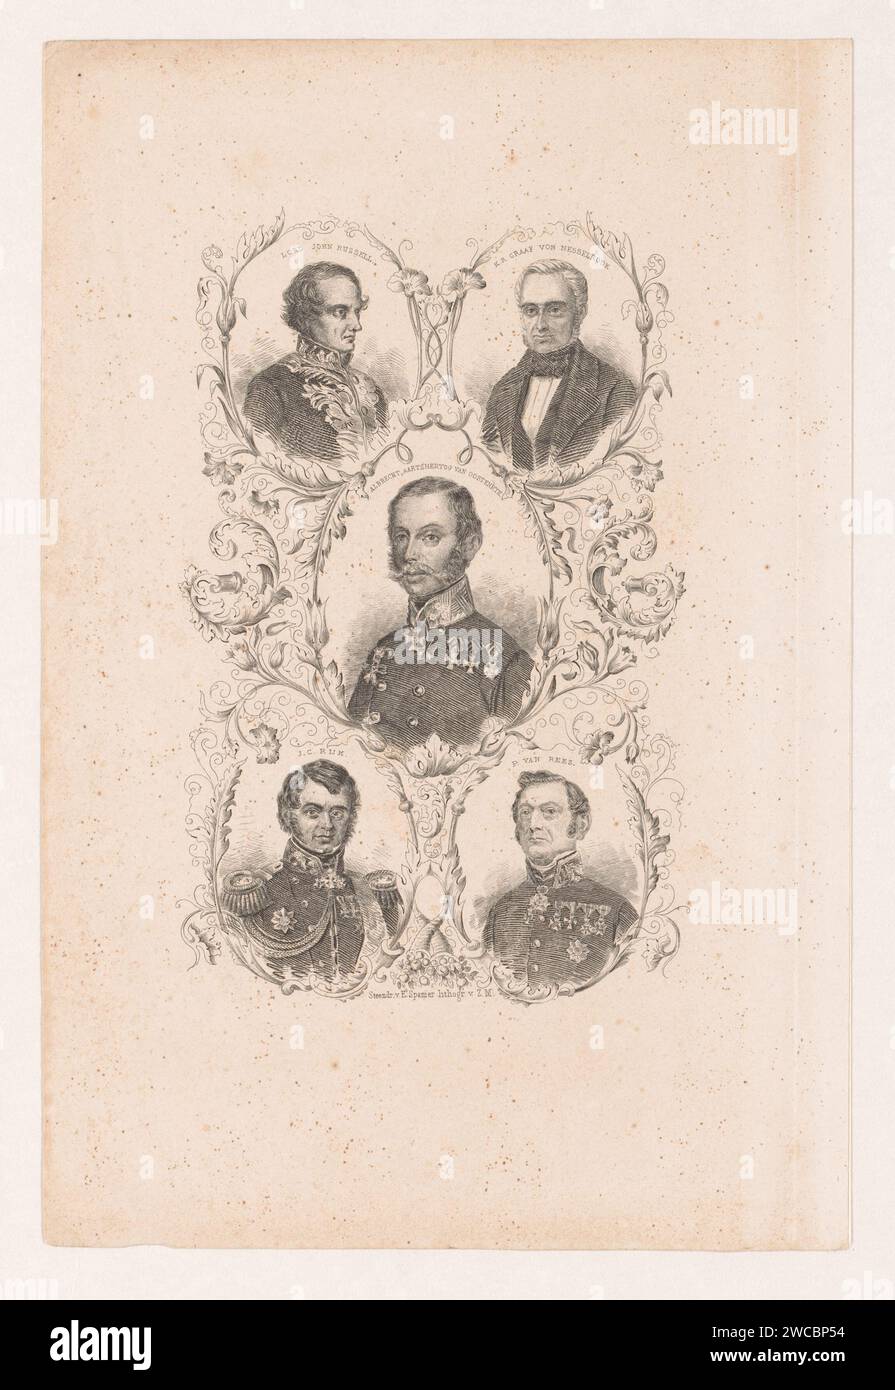 Portraits of John Russel, Karl Robert von Nesselrode, Albrecht Archduke of Austria, Julius Constantijn Rijk and P. van Rees, Anonymous, Elias Spanier, 1831 - 1854 print  The Hague paper  historical persons (portraits and scenes from the life) Stock Photo